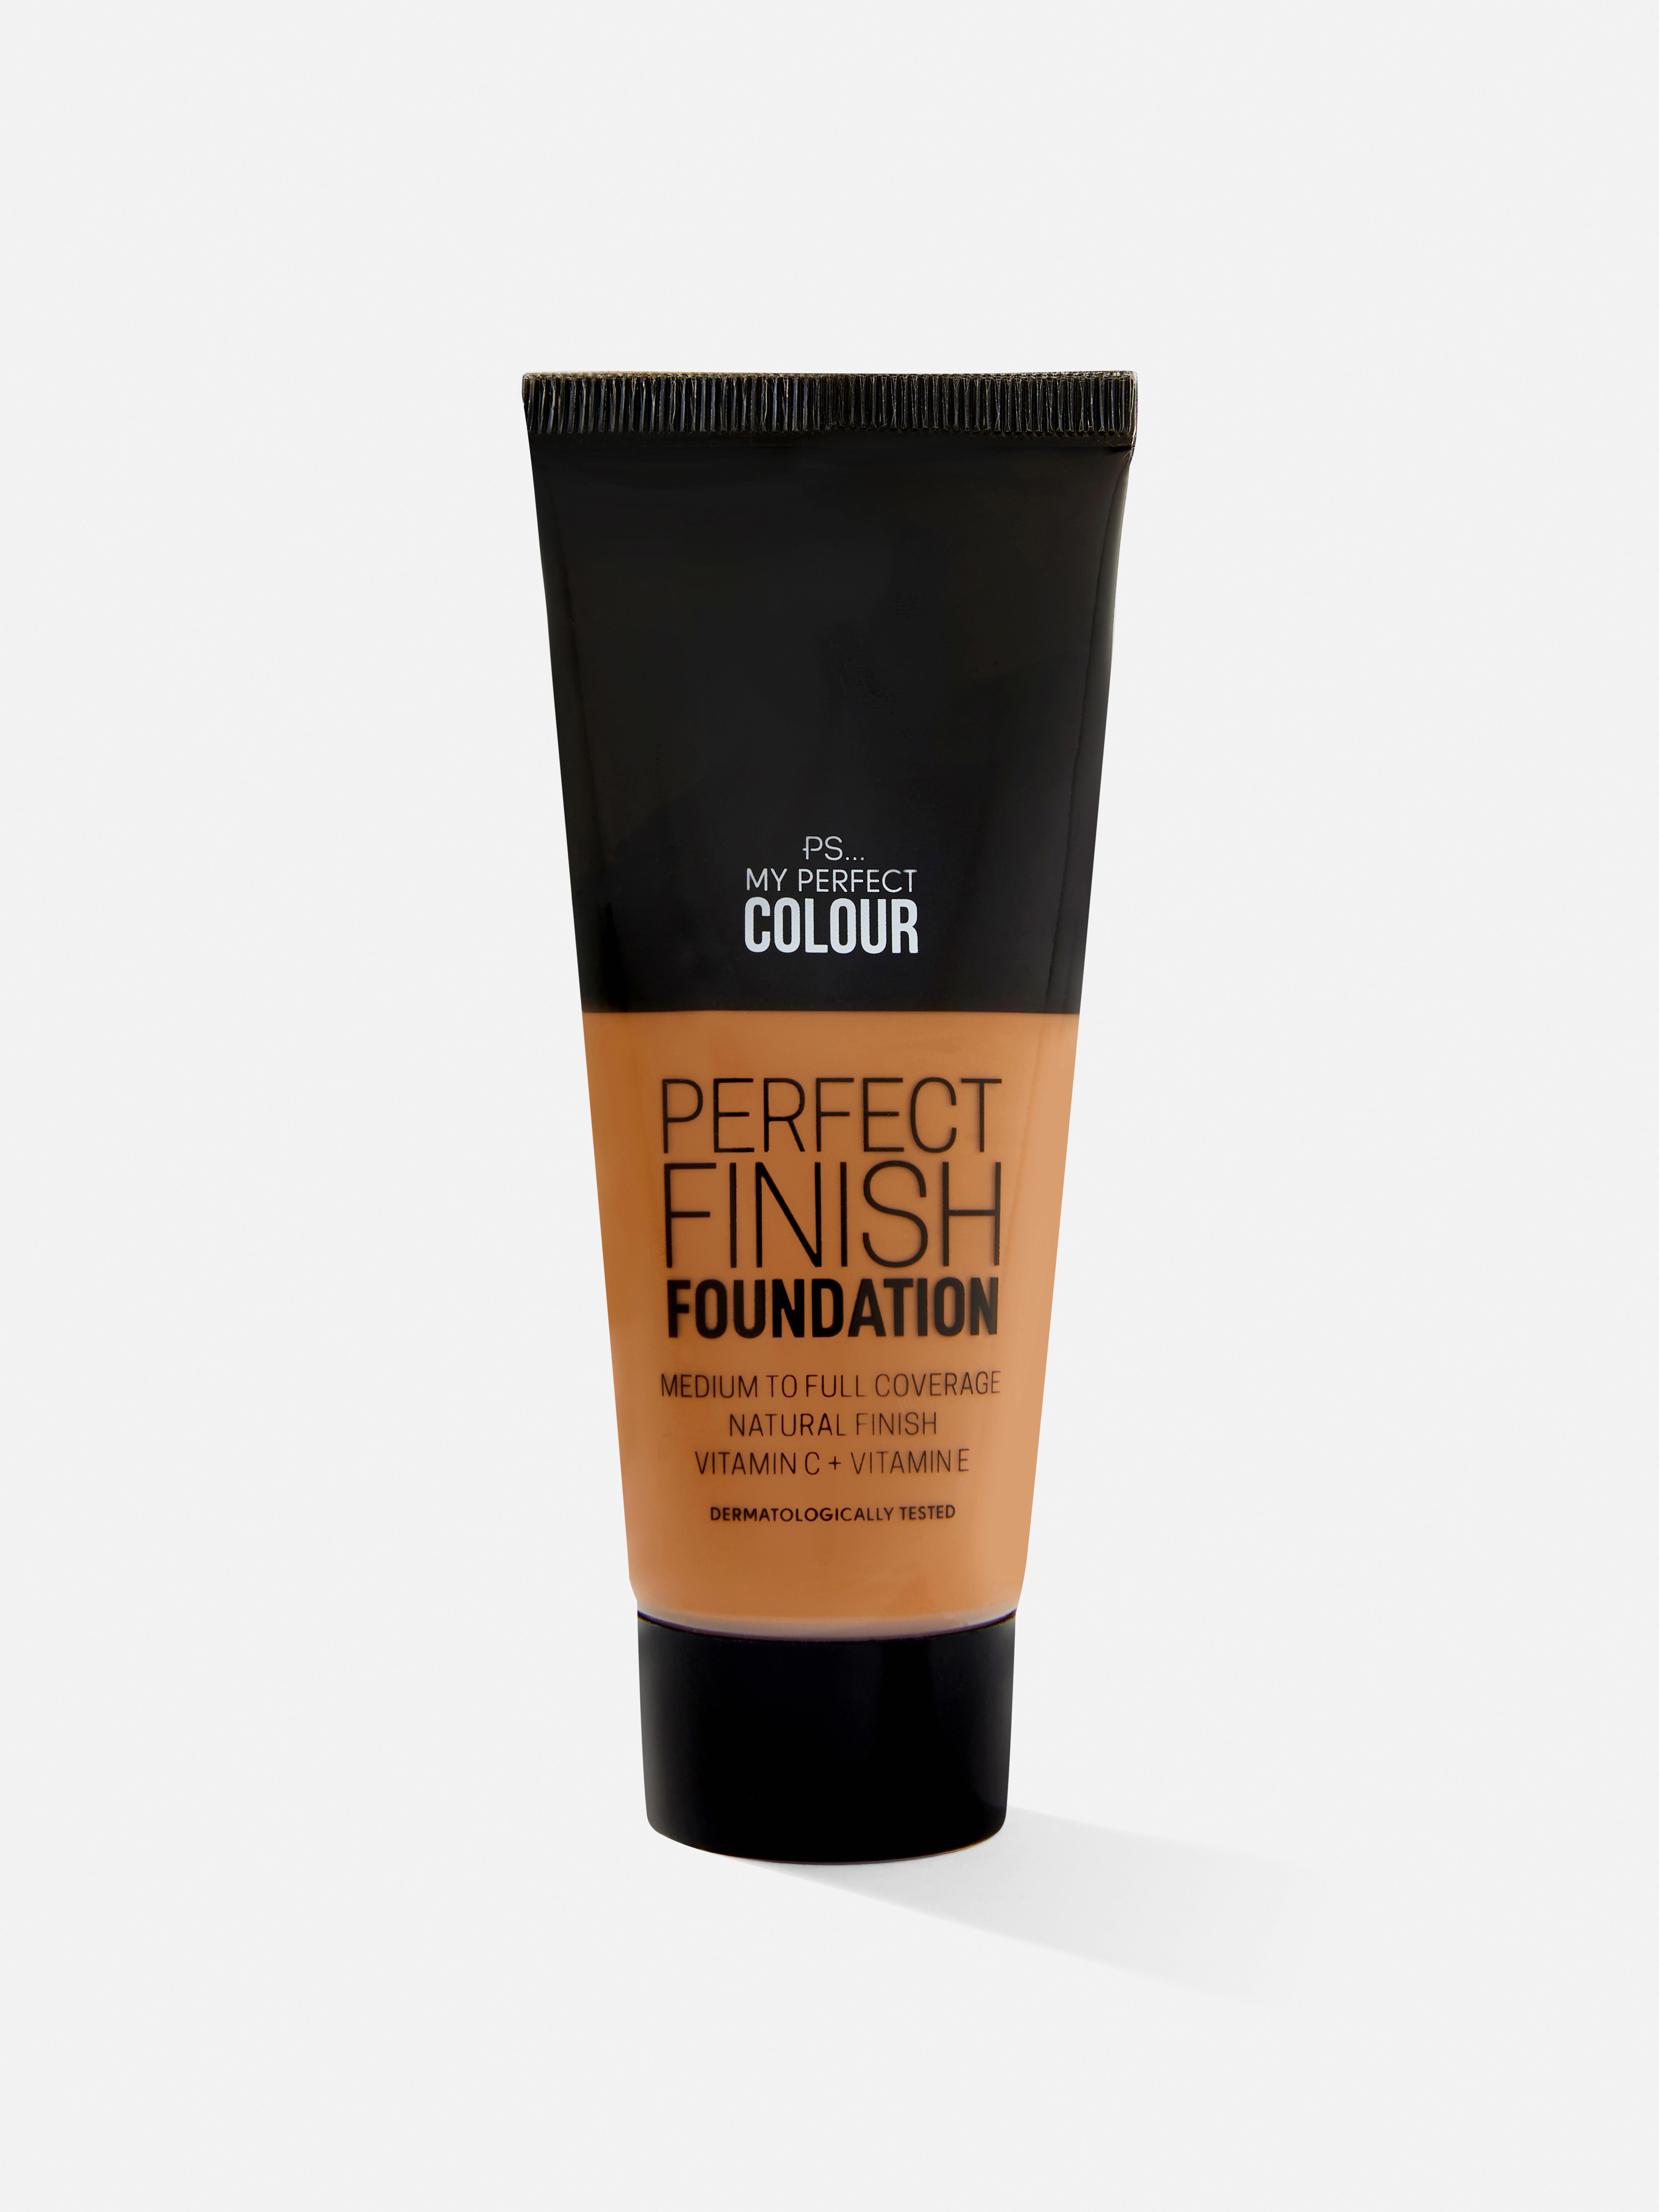 PS... My Perfect Colour Foundation Dark Brown